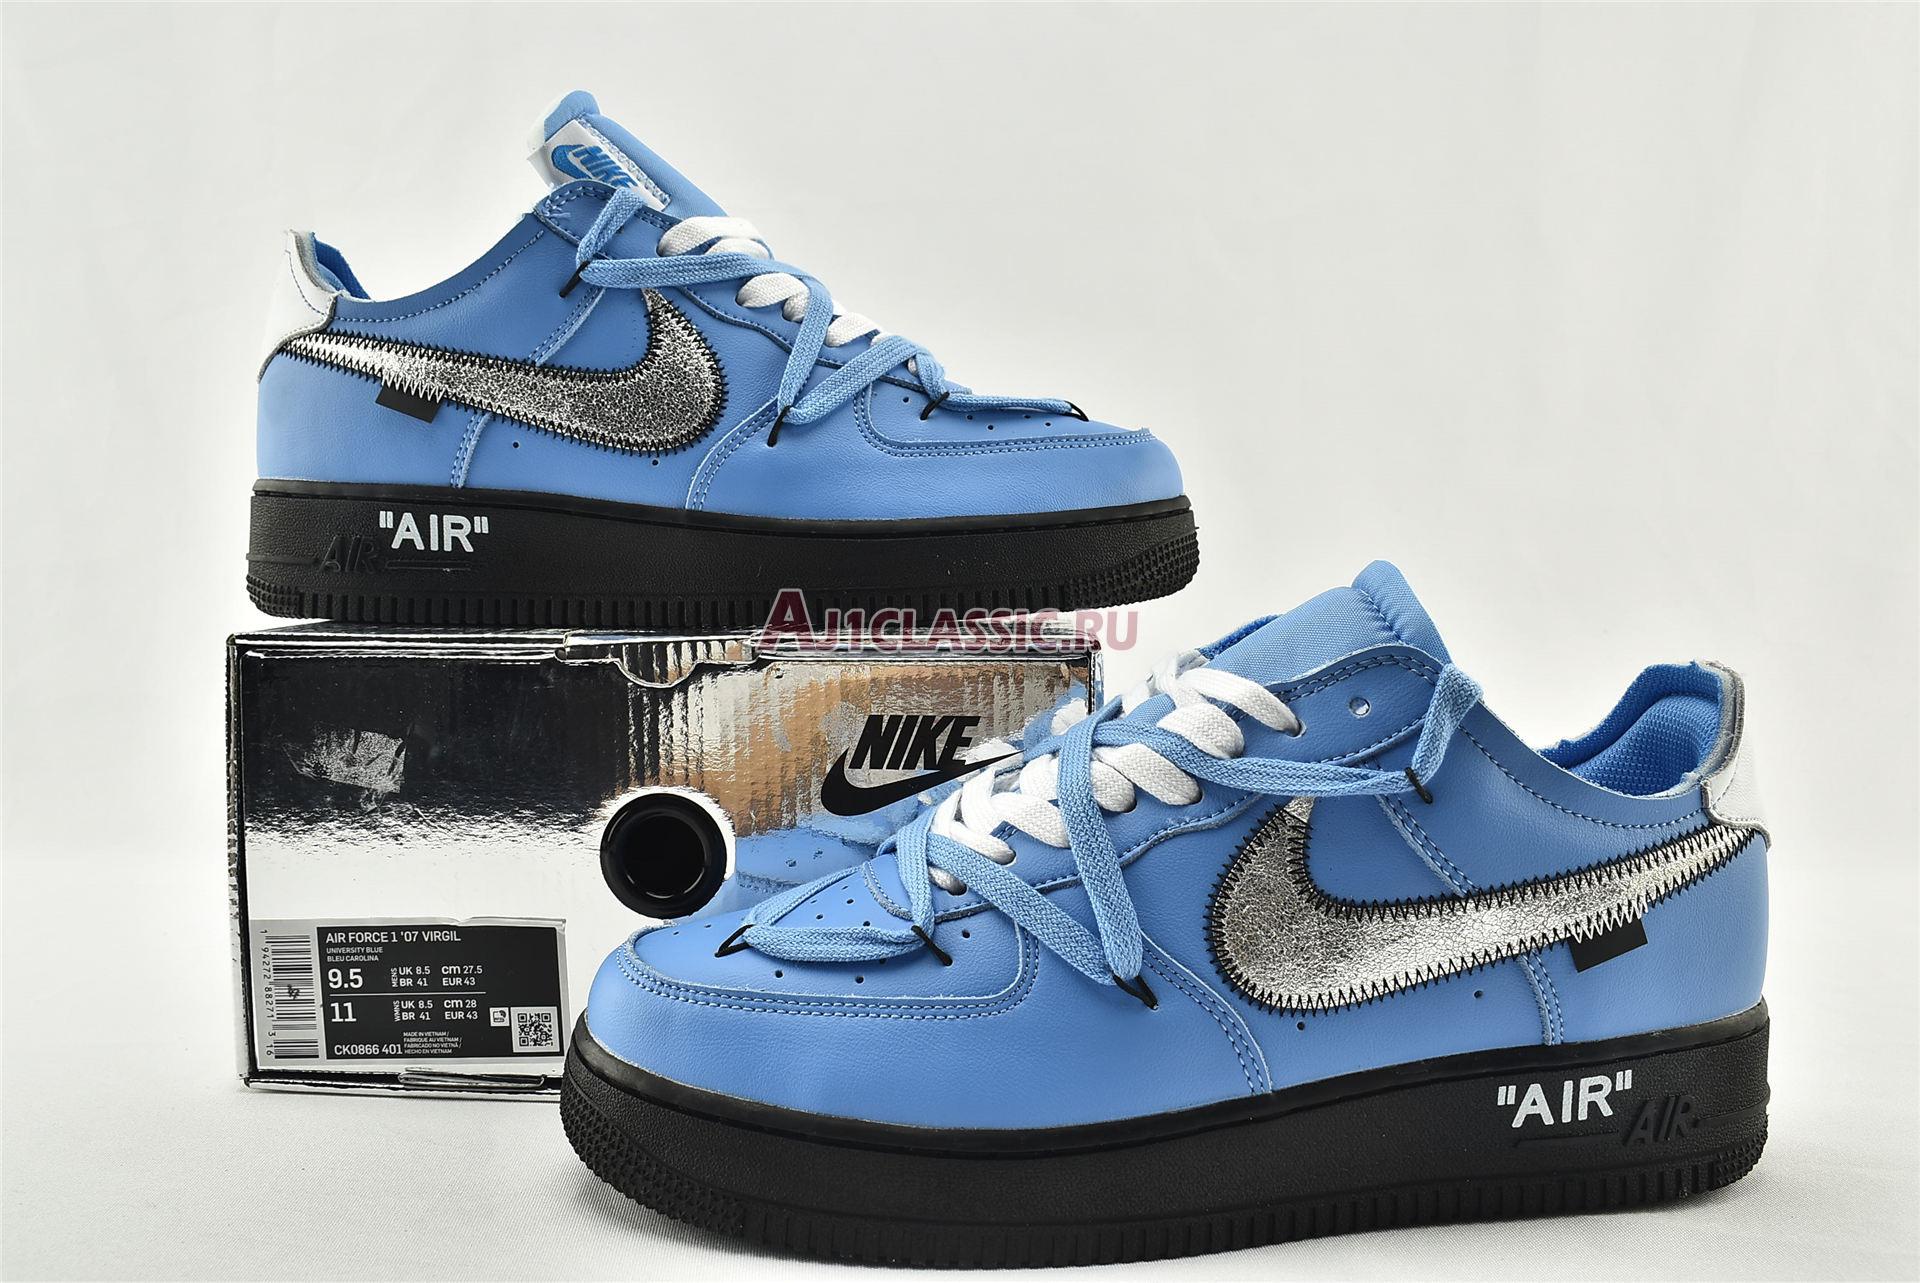 Off-White x Nike Air Force 1 Low "MCA" CK0866-401